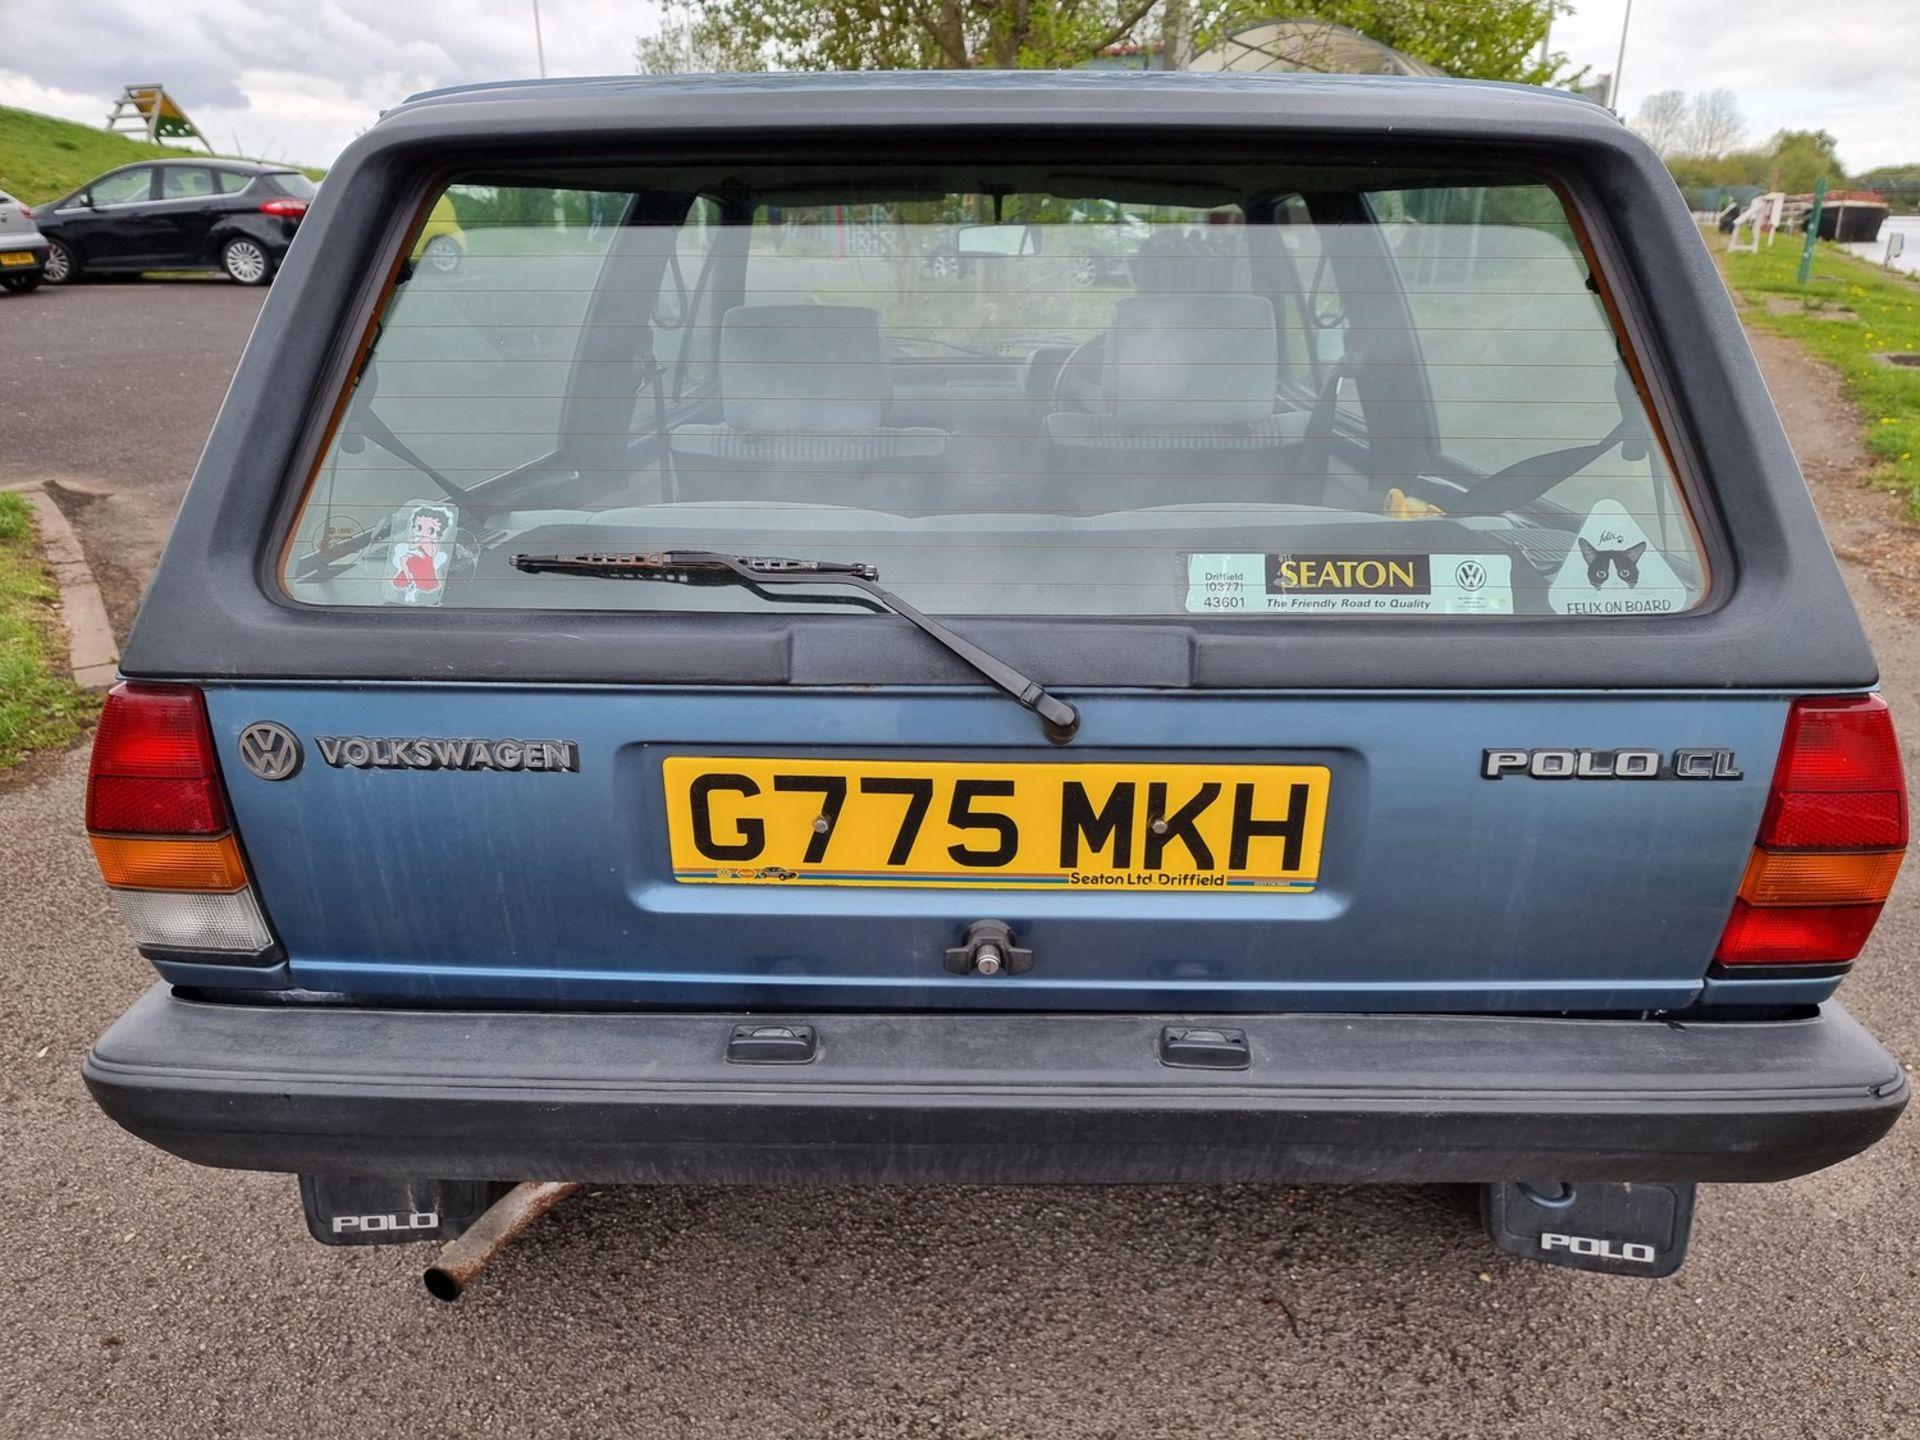 1989 VW Polo Mk2, 1272cc. Registration number G775 MKH. Chassis number WVWZZZ80ZKW168973. Engine - Image 6 of 16